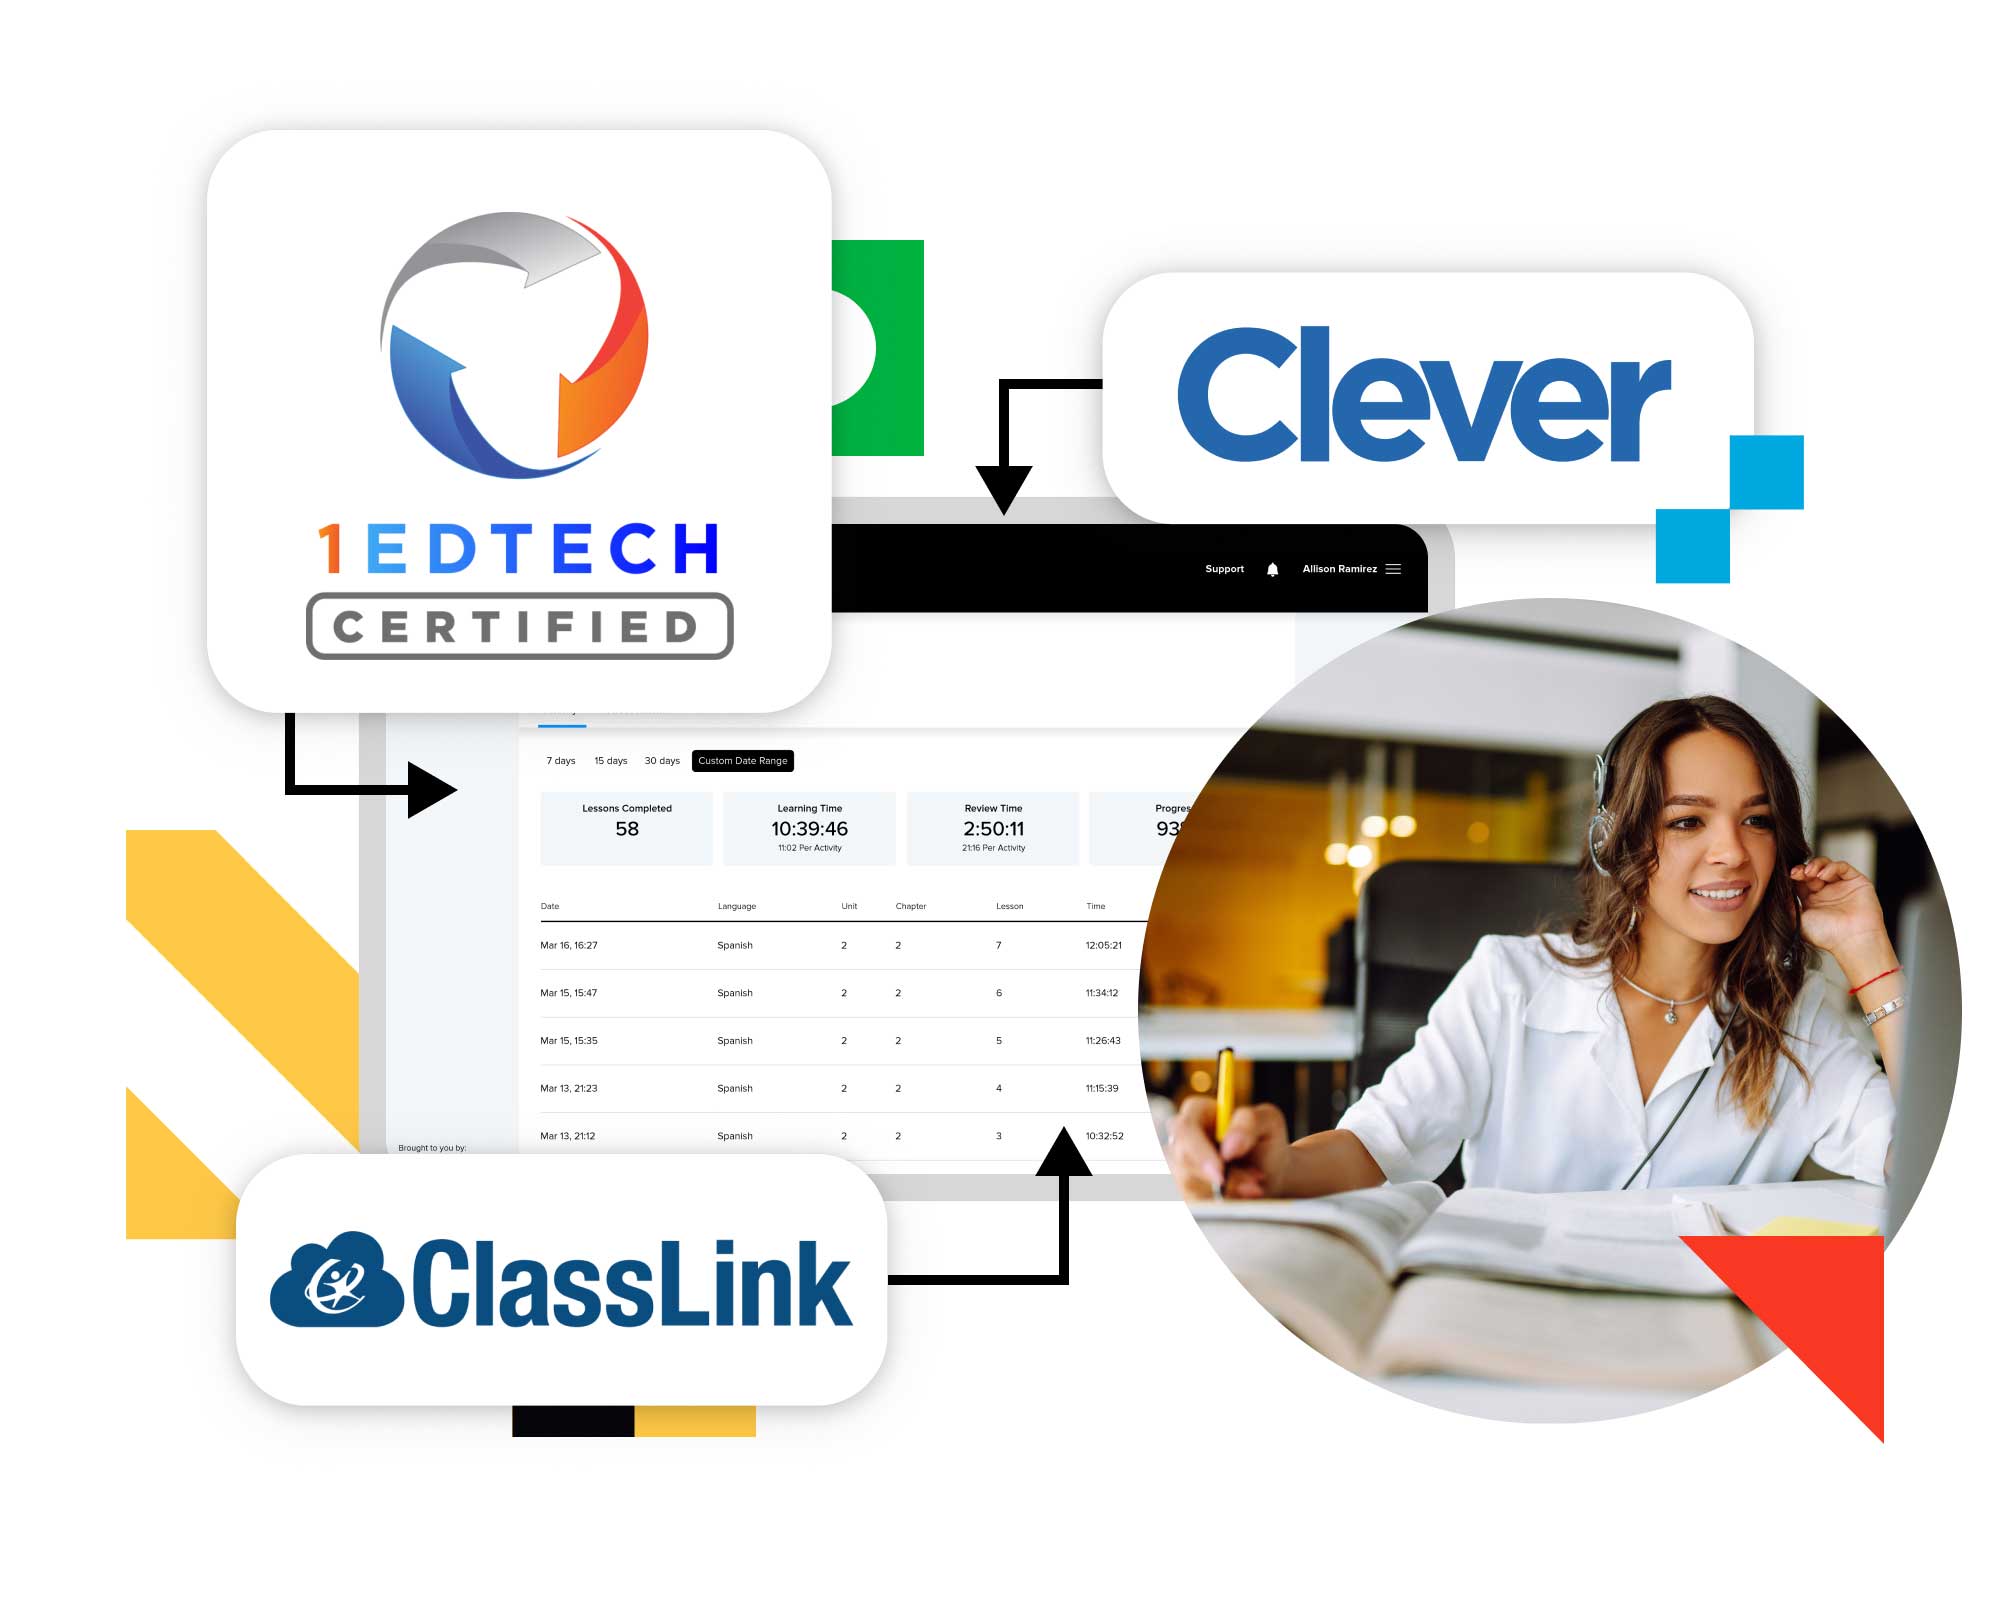 Integrated with Classlink, Clever, & Edtech